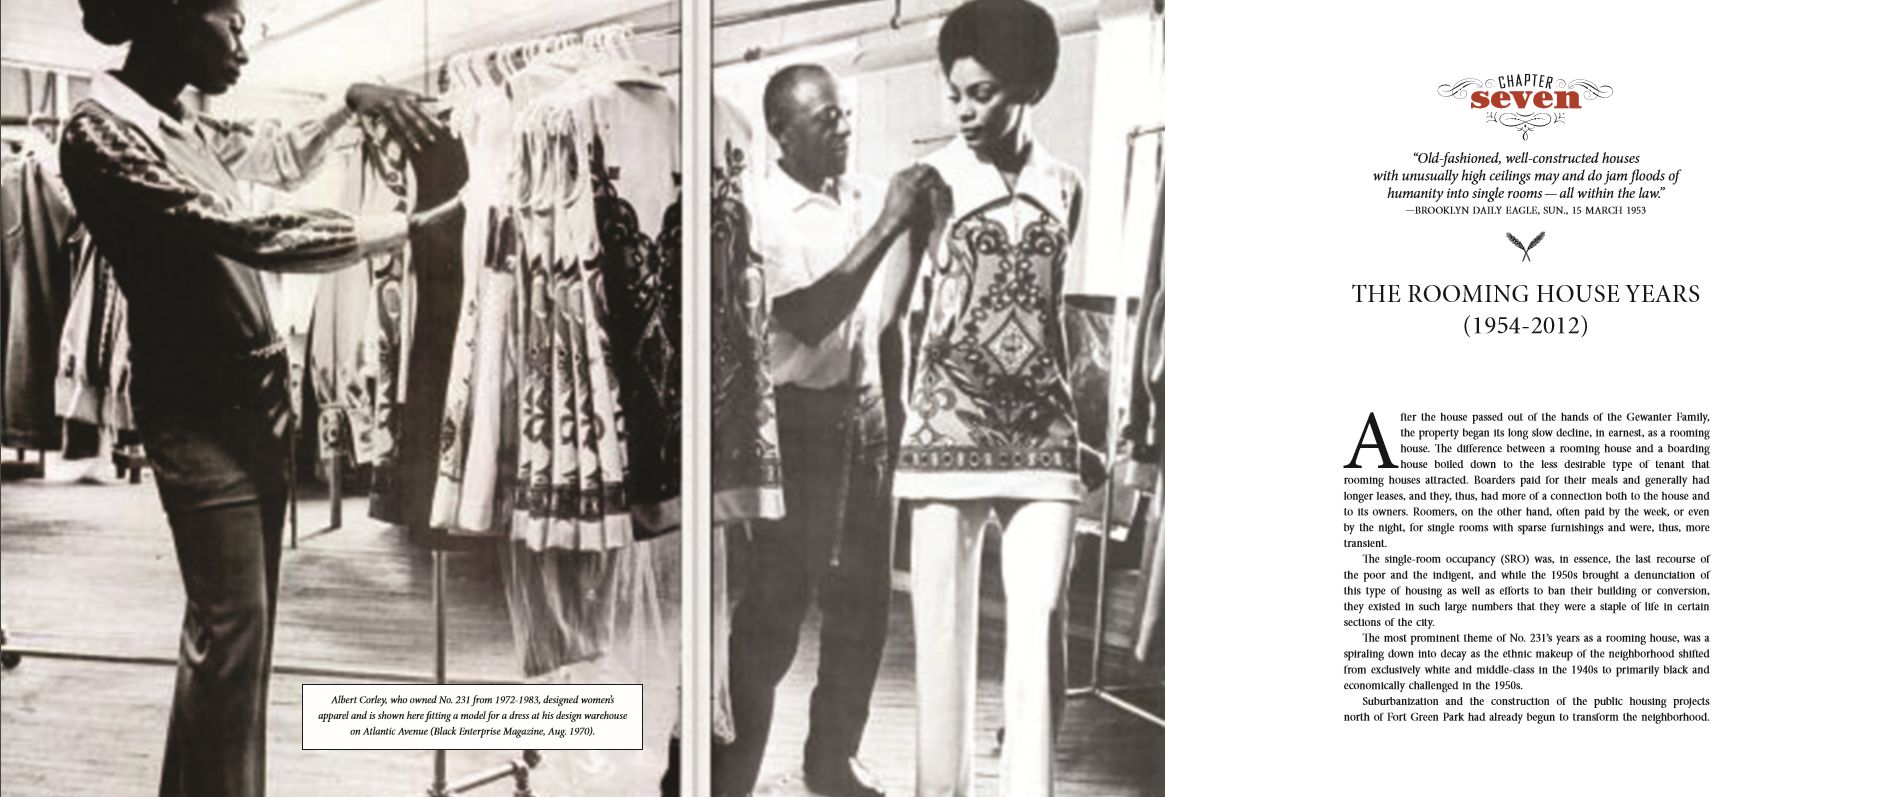 Albert Corley, an early recipient of a grant from the Bed-Stuy Resoration Corporation, was a womens' dress designer and manufacturer (No. 231 Cumberland Street: The Story of a House).